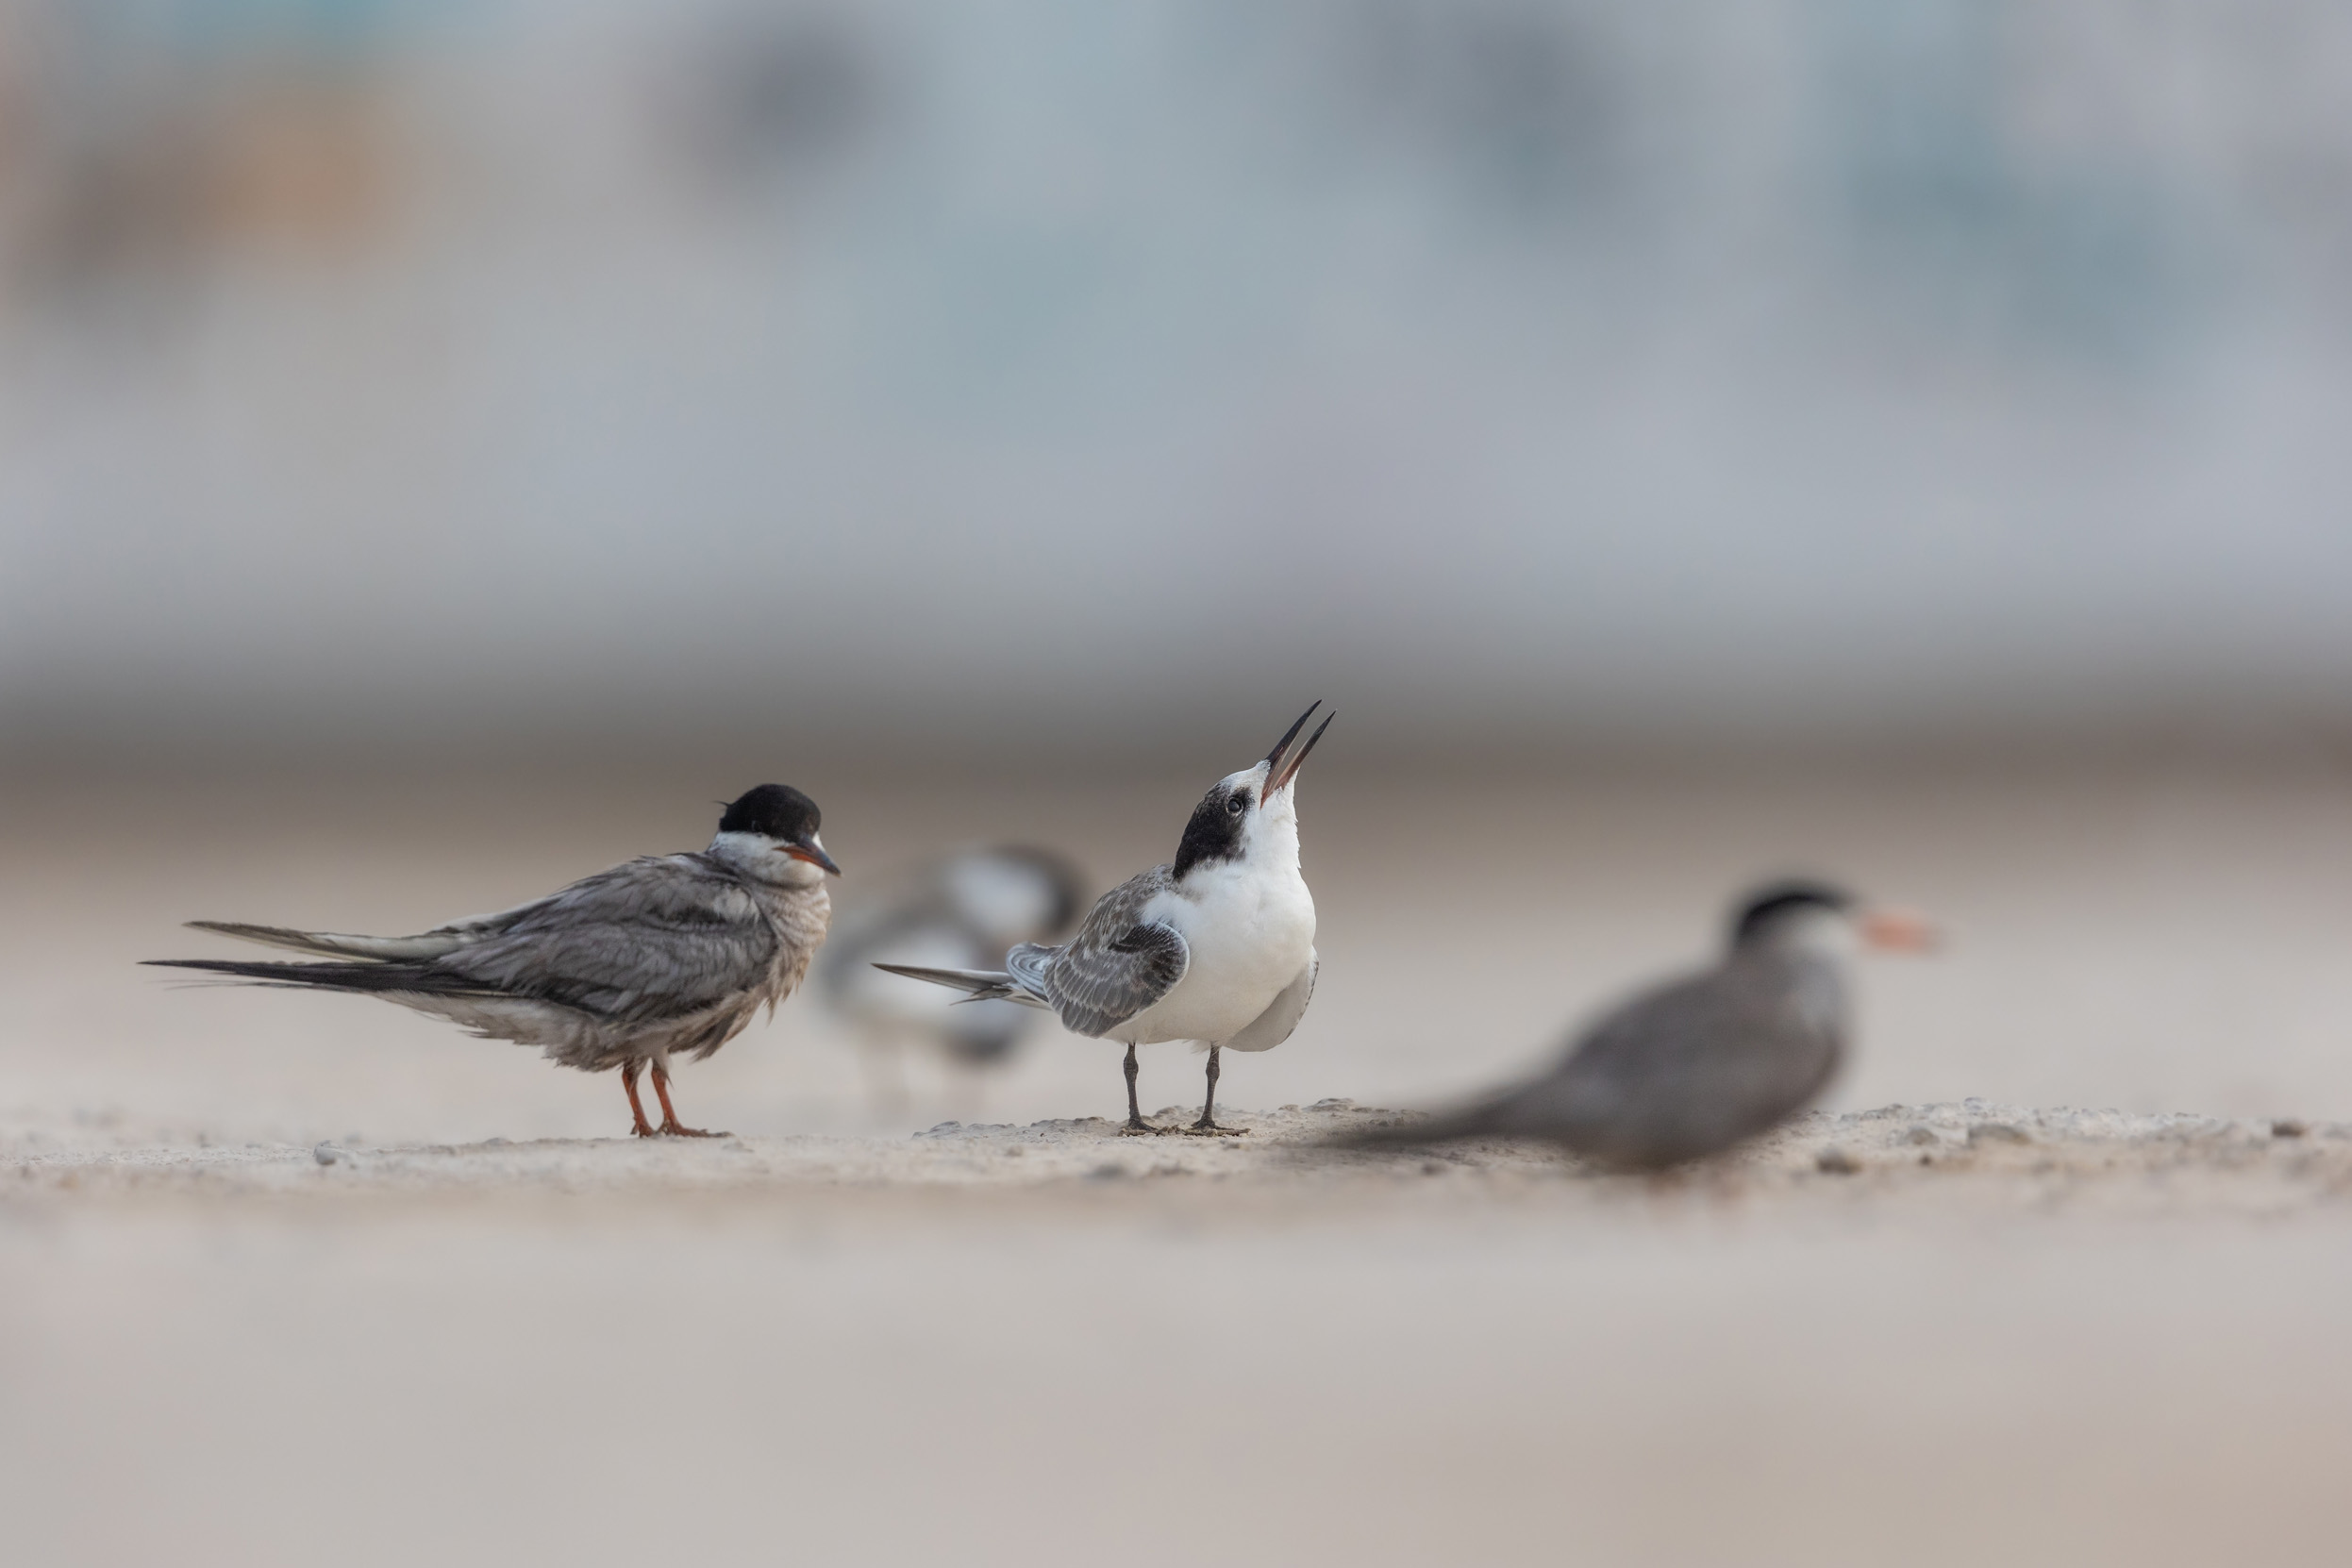 A group of four juvenile Common Turns on a beach looking towards the sky.